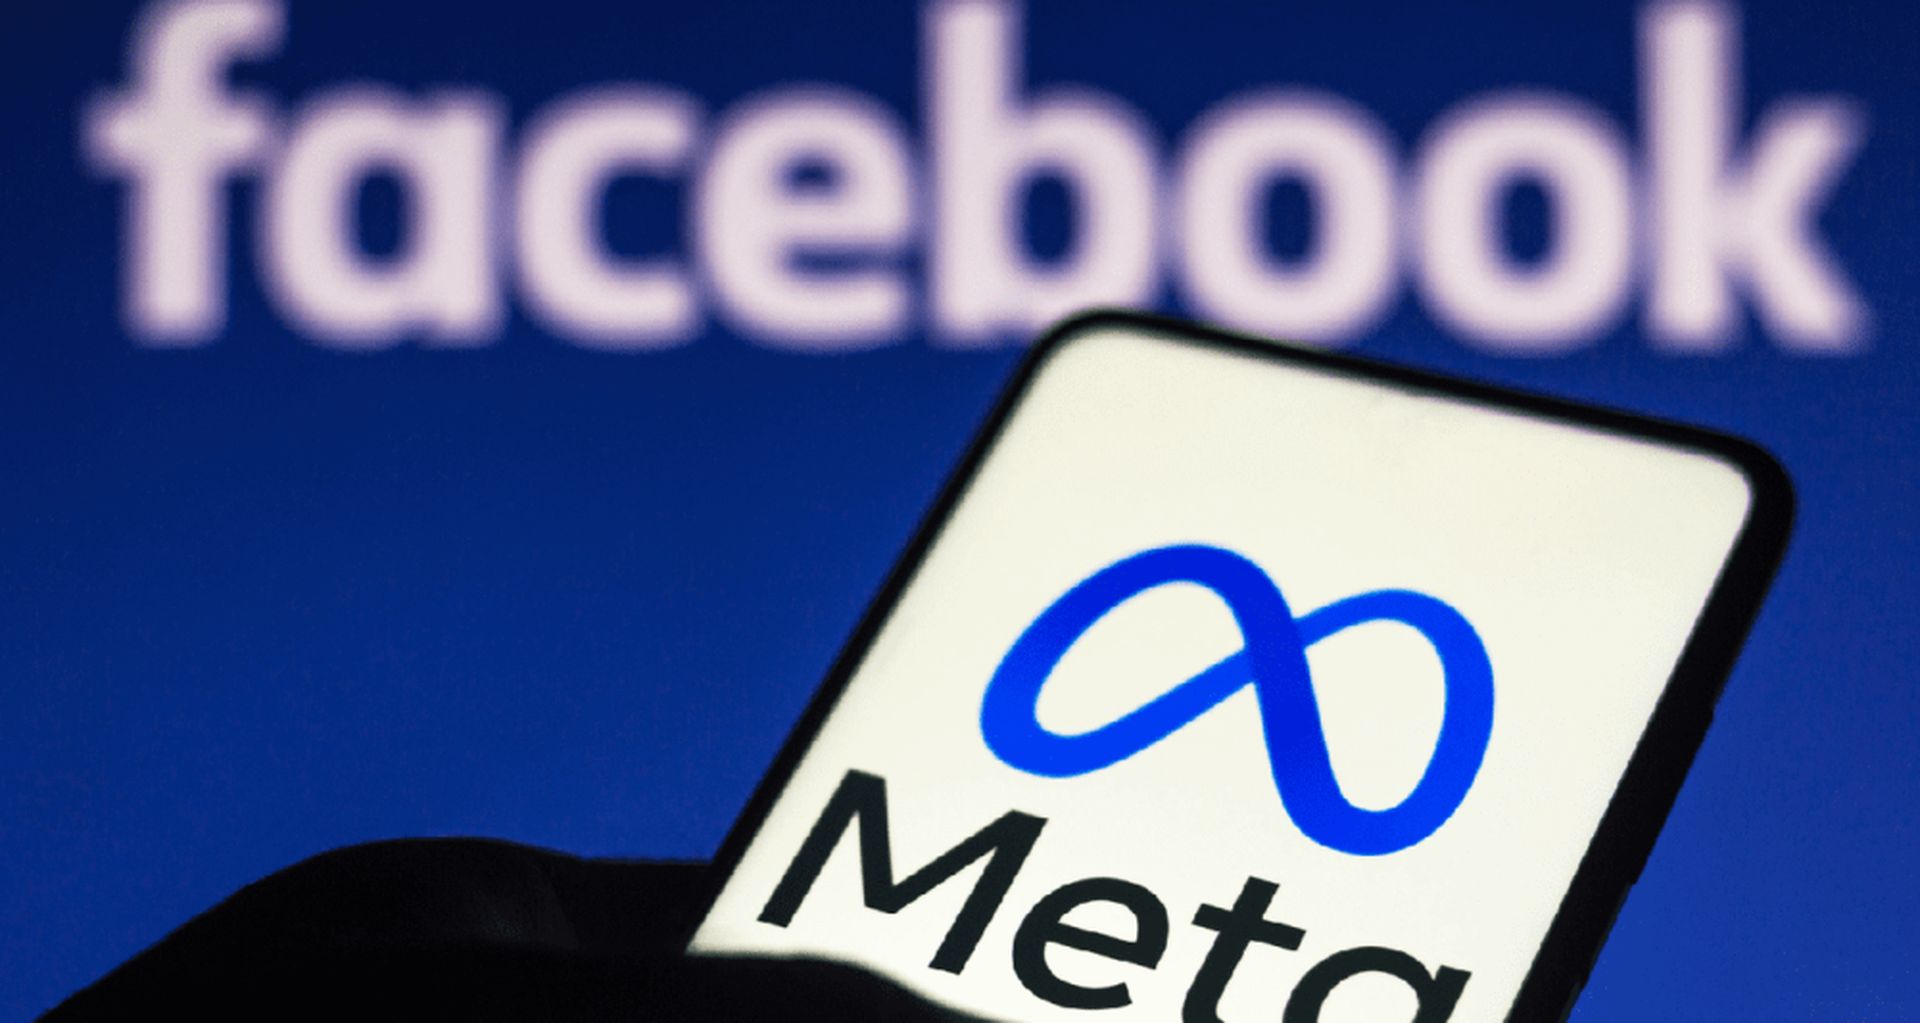 In this article, we are going to be covering what is Meta Pay, as well as its features and changes compared to the previous Facebook Pay.